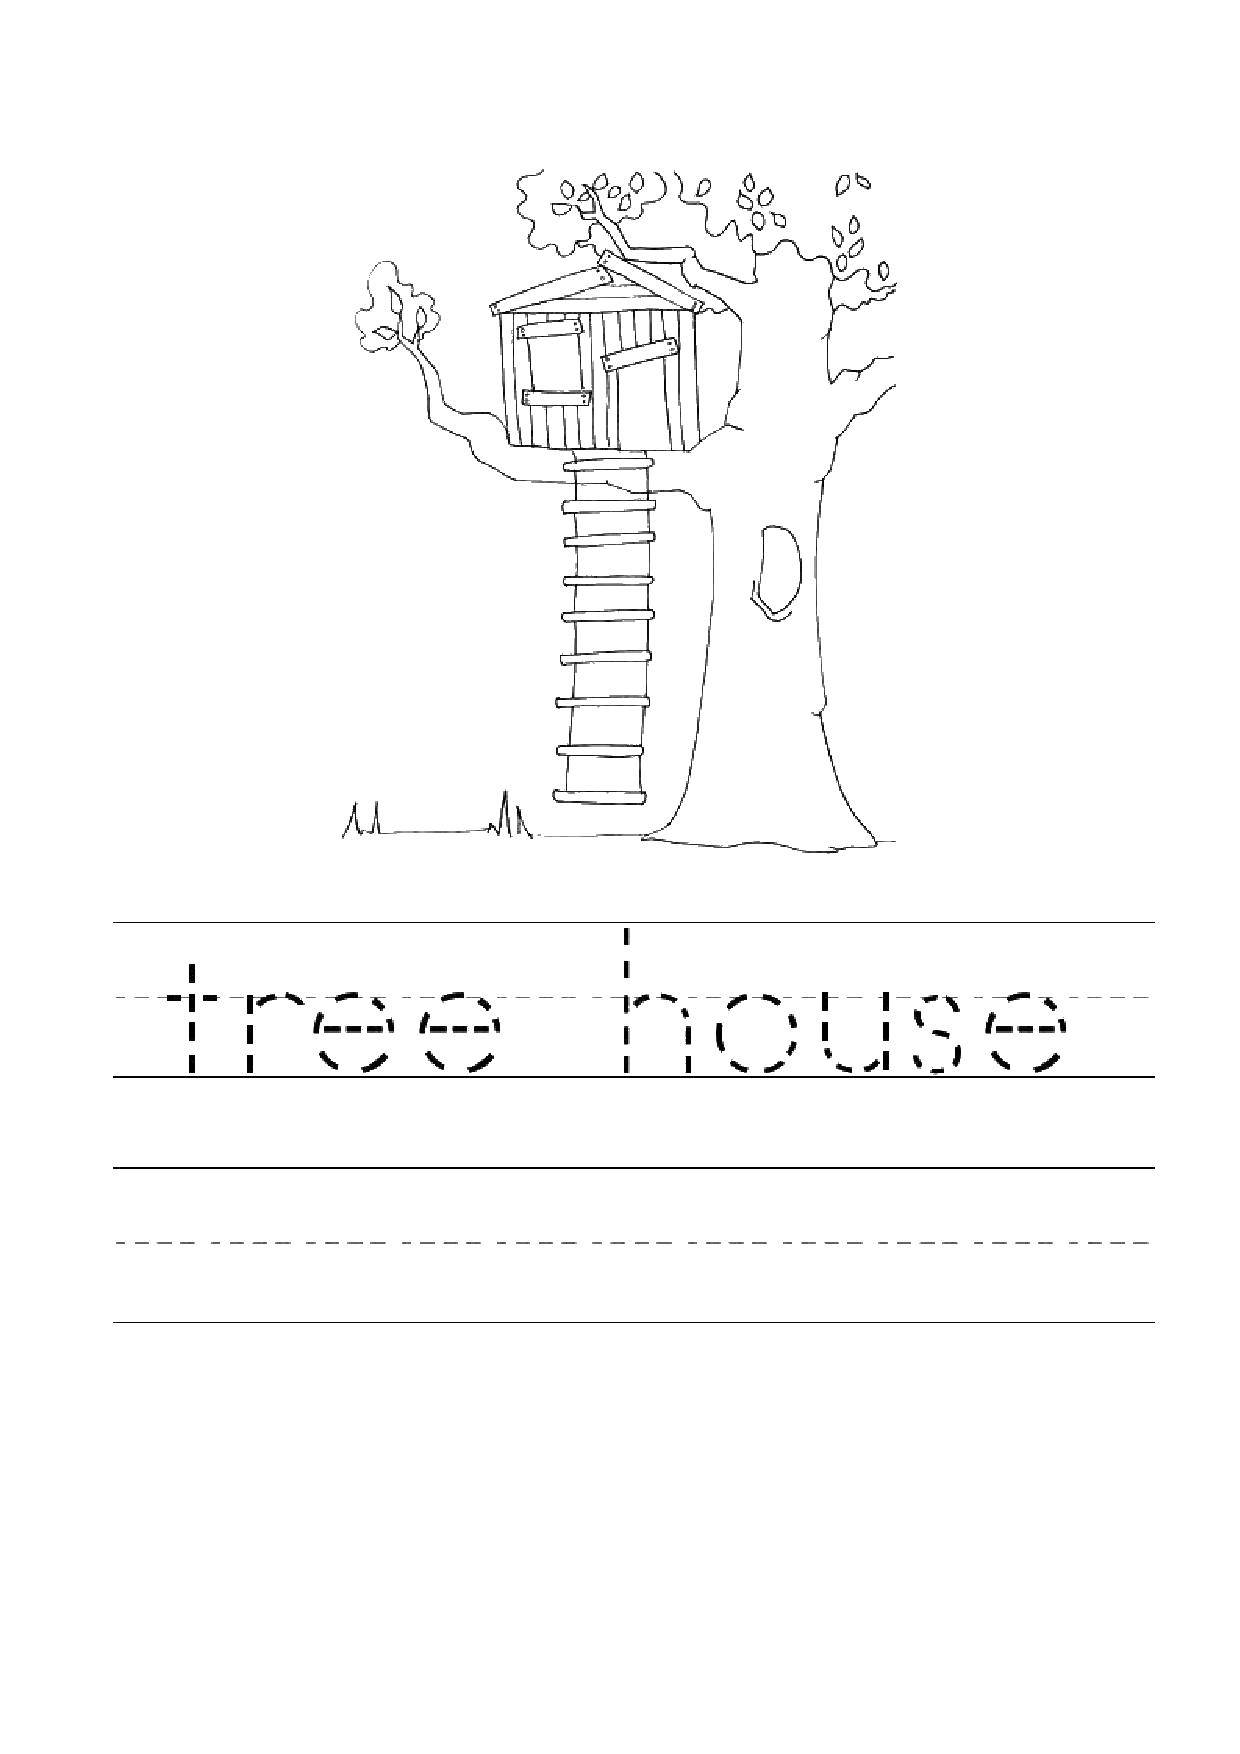 Coloring Tree house. Category English words. Tags:  English.